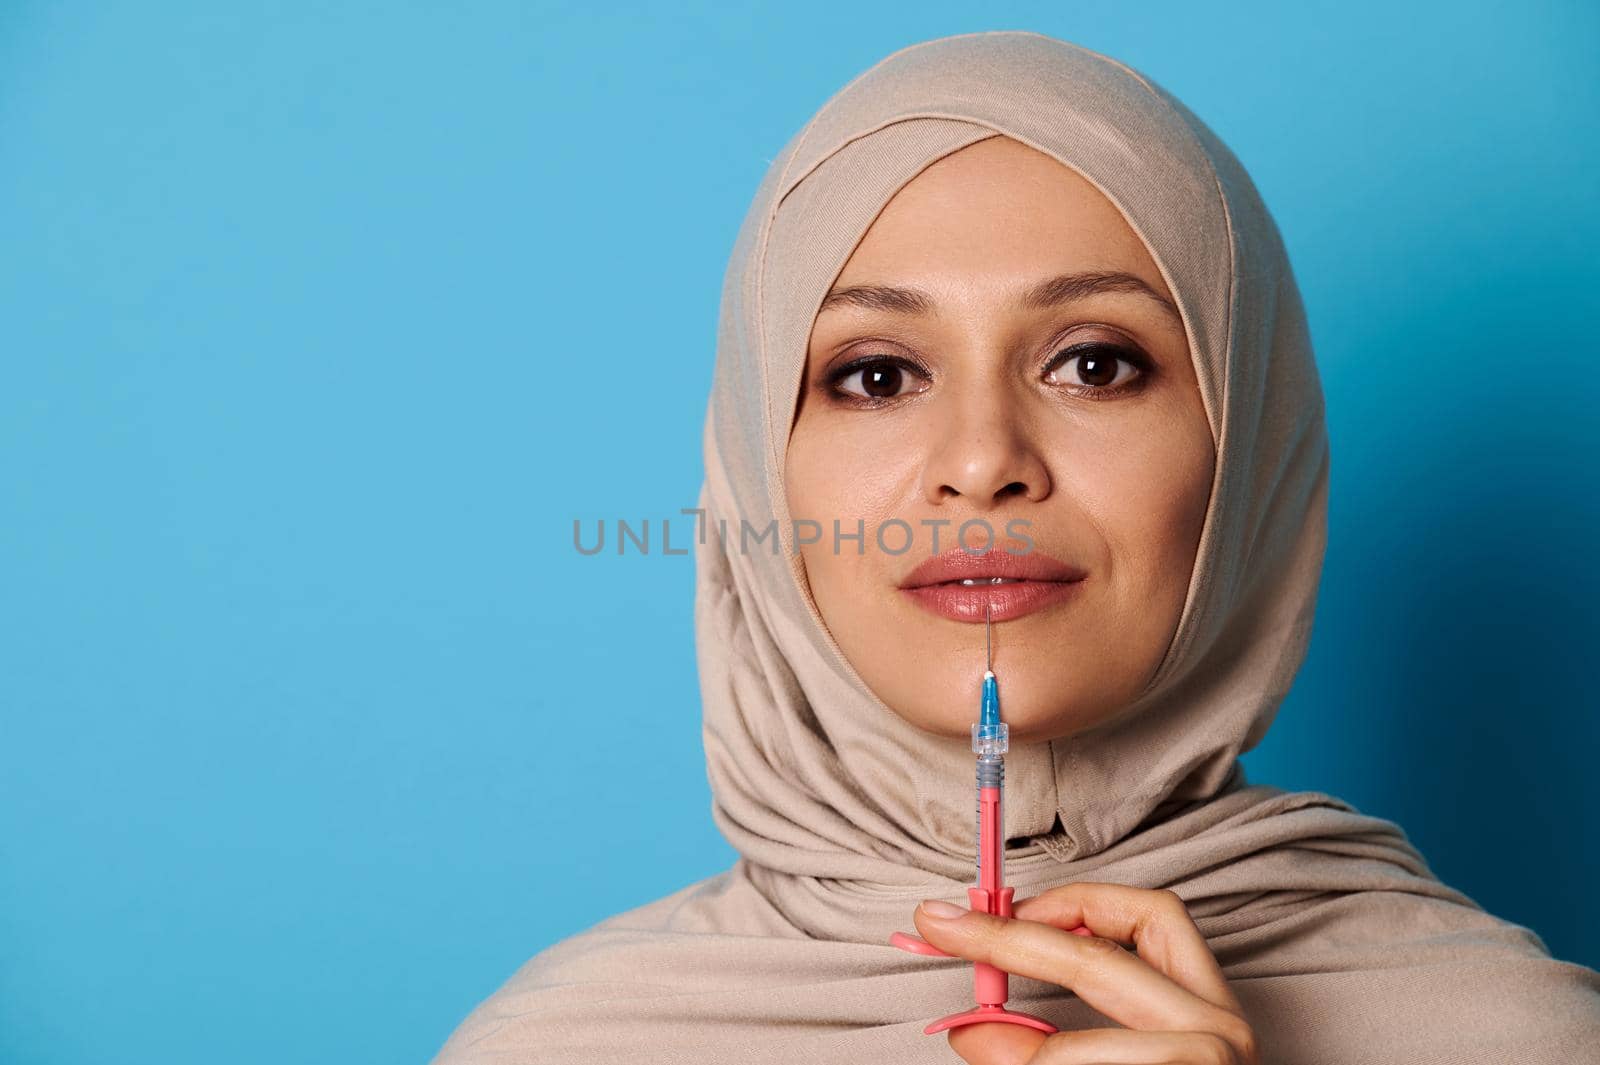 Closeup portrait of pretty Muslim woman with covered head in hijab holding a syringe with beauty injection near her lips. by artgf